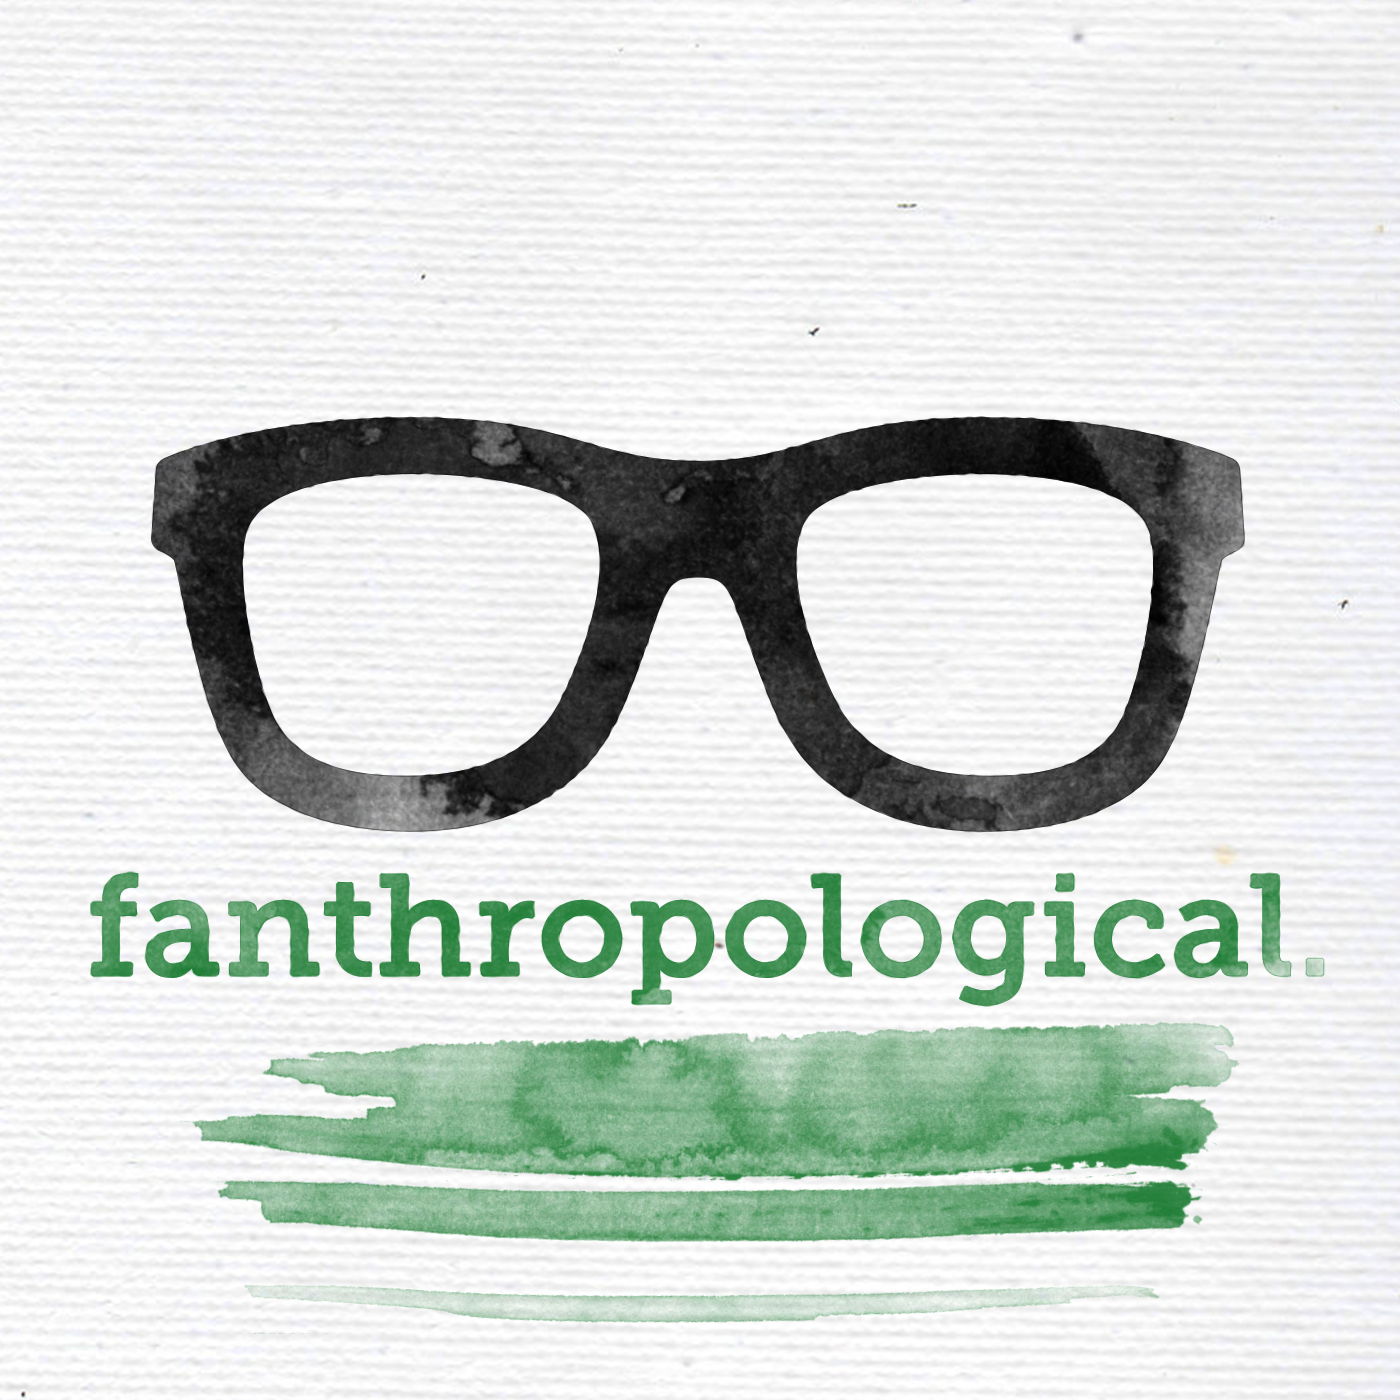 Fanthropological Finale: Cover to Coverage (⅓)